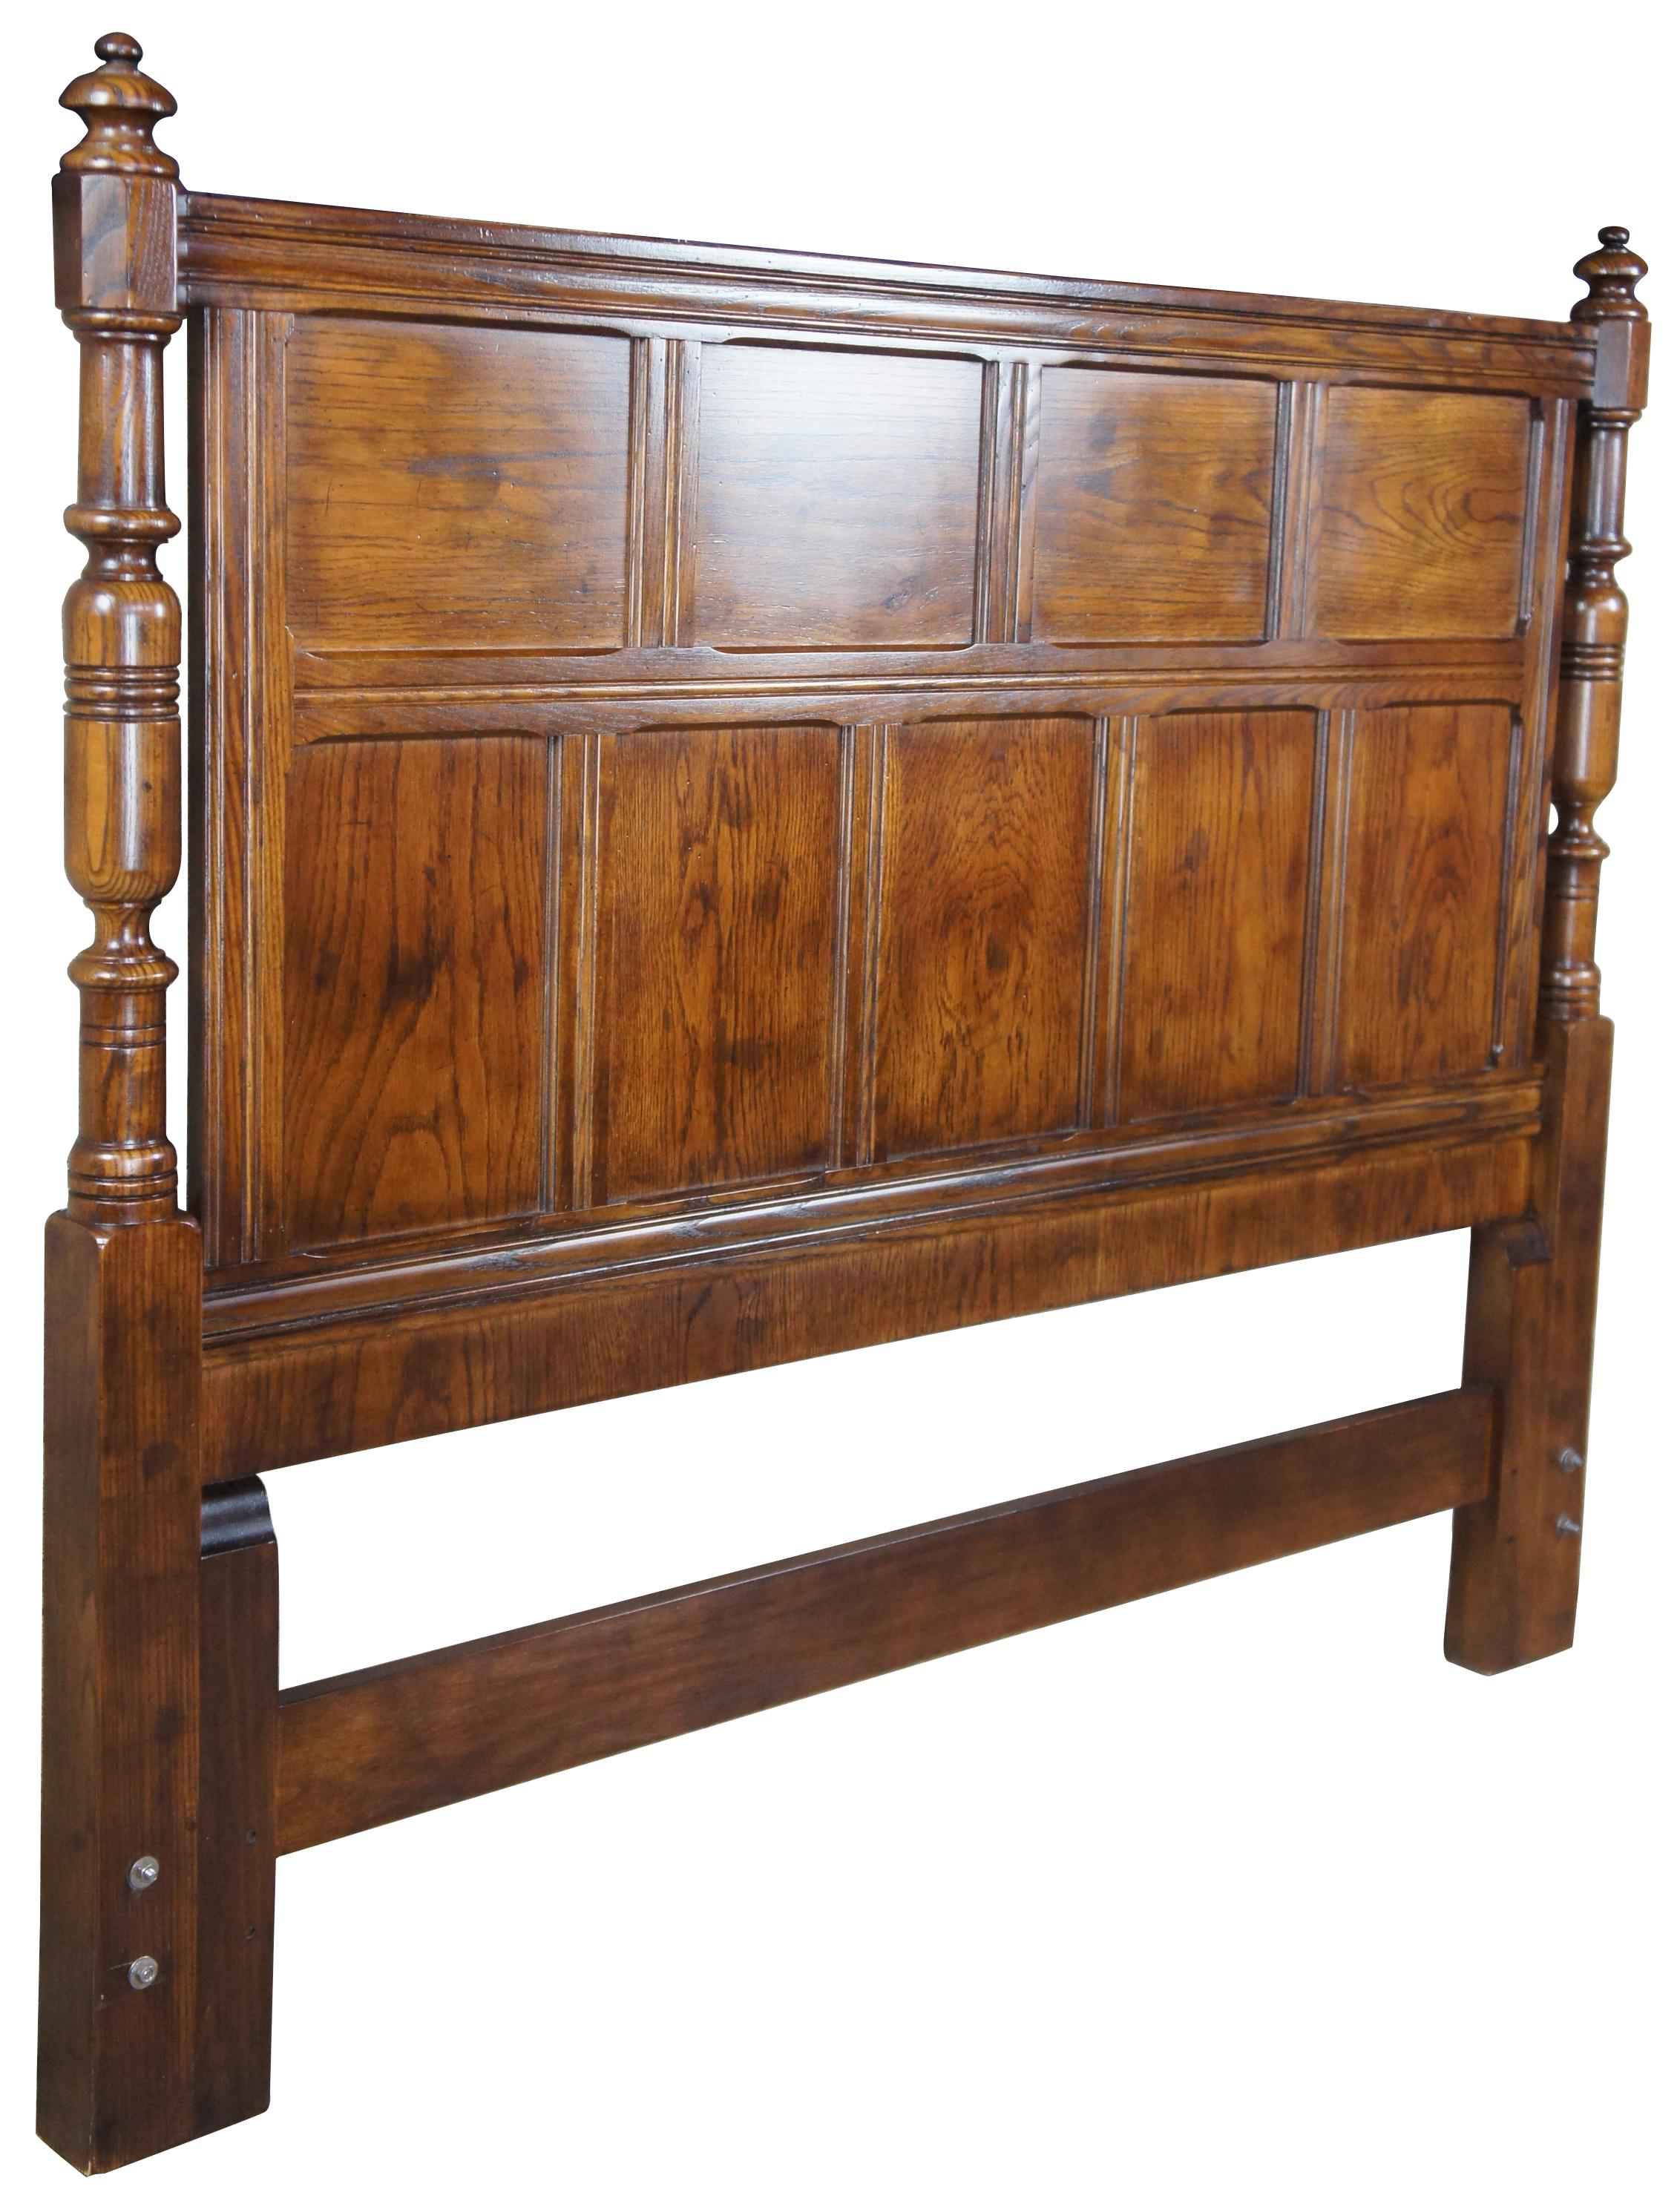 1979 Henredon Folio 12 oak queen or full sized headboard. Features 18th century design with turned baluster posts and paneled back.
 